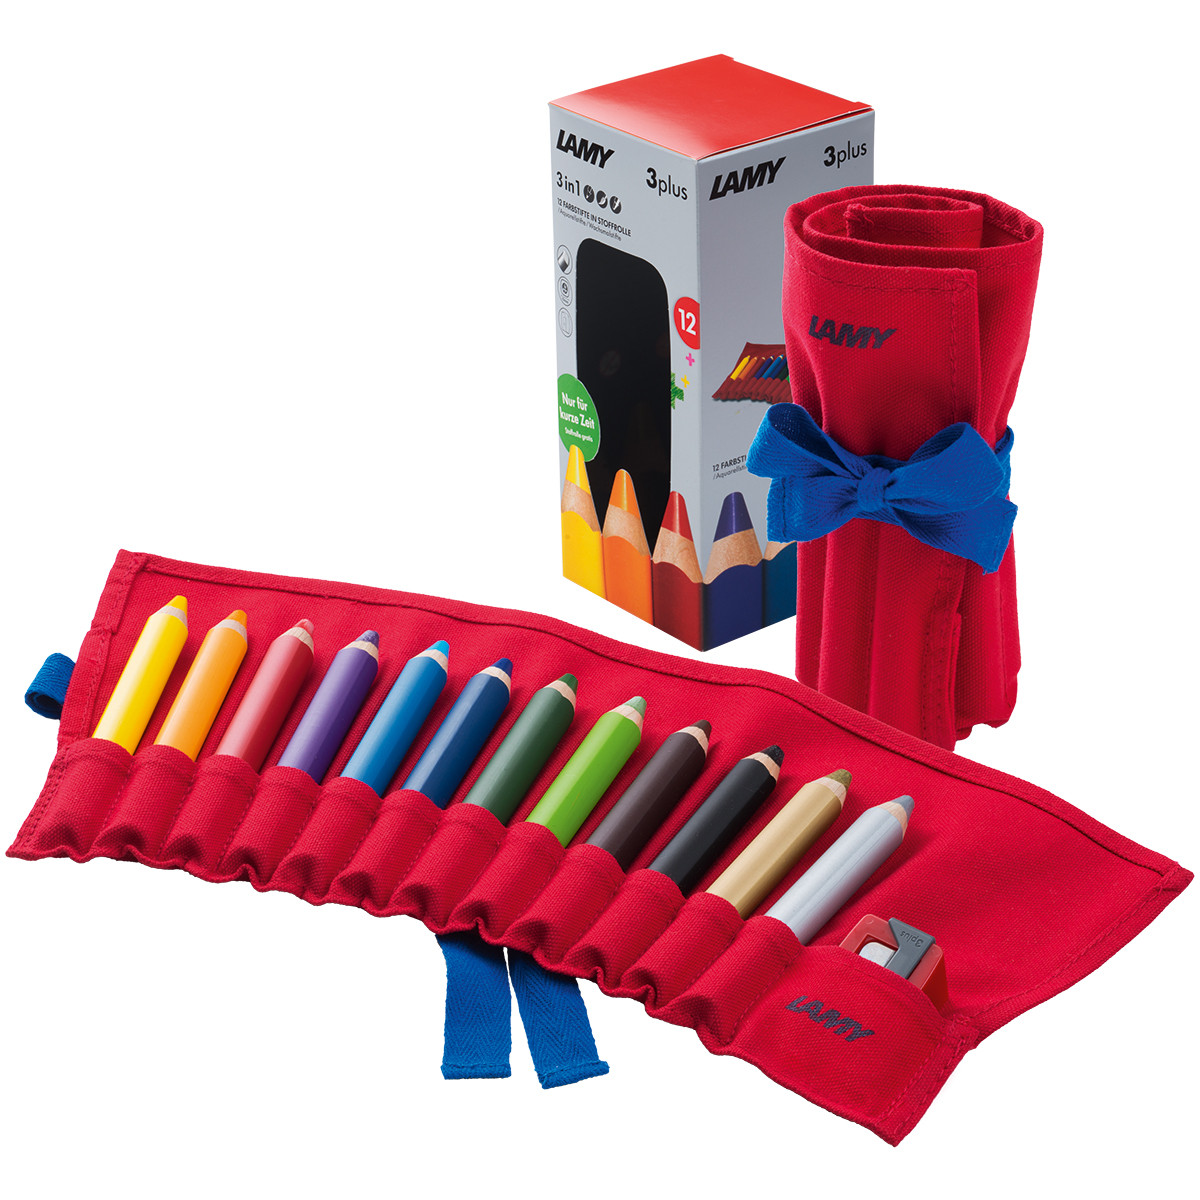 Lamy 3plus Colouring Pencils - Assorted Colours (Rollercase of 12)